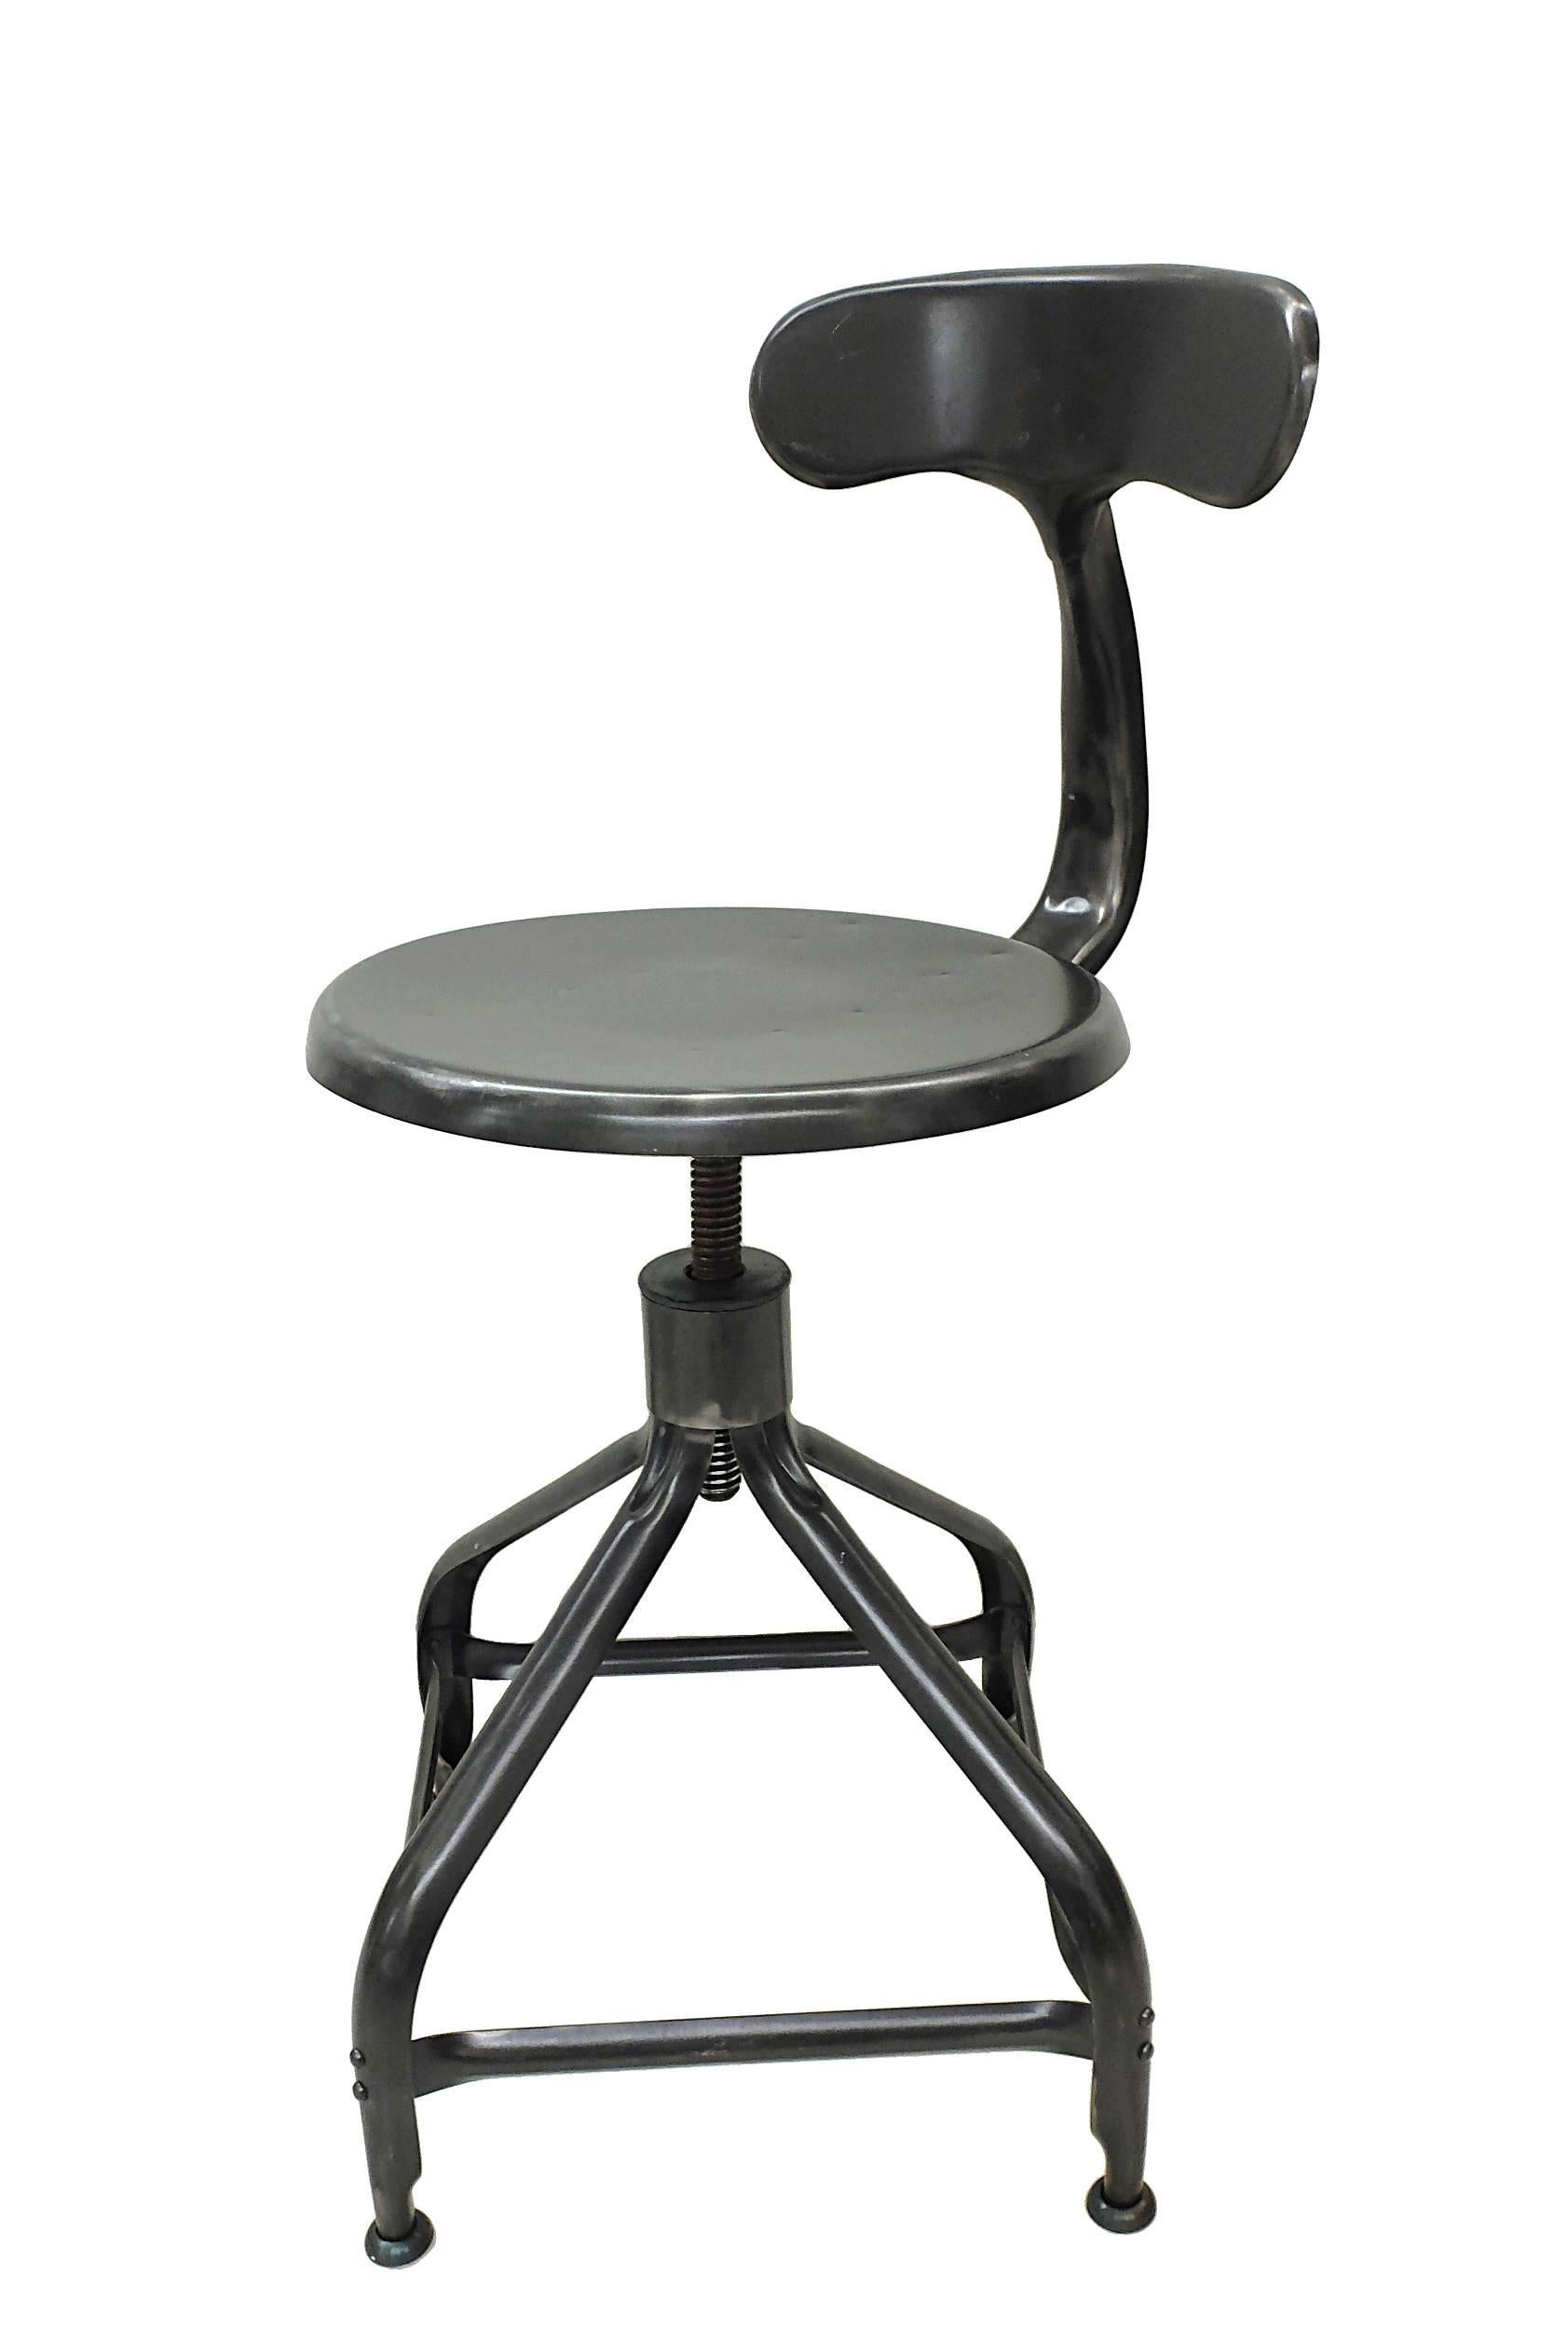 French Industrial Working Adjustable Chair ' Nicole', Six Available, France, 1945